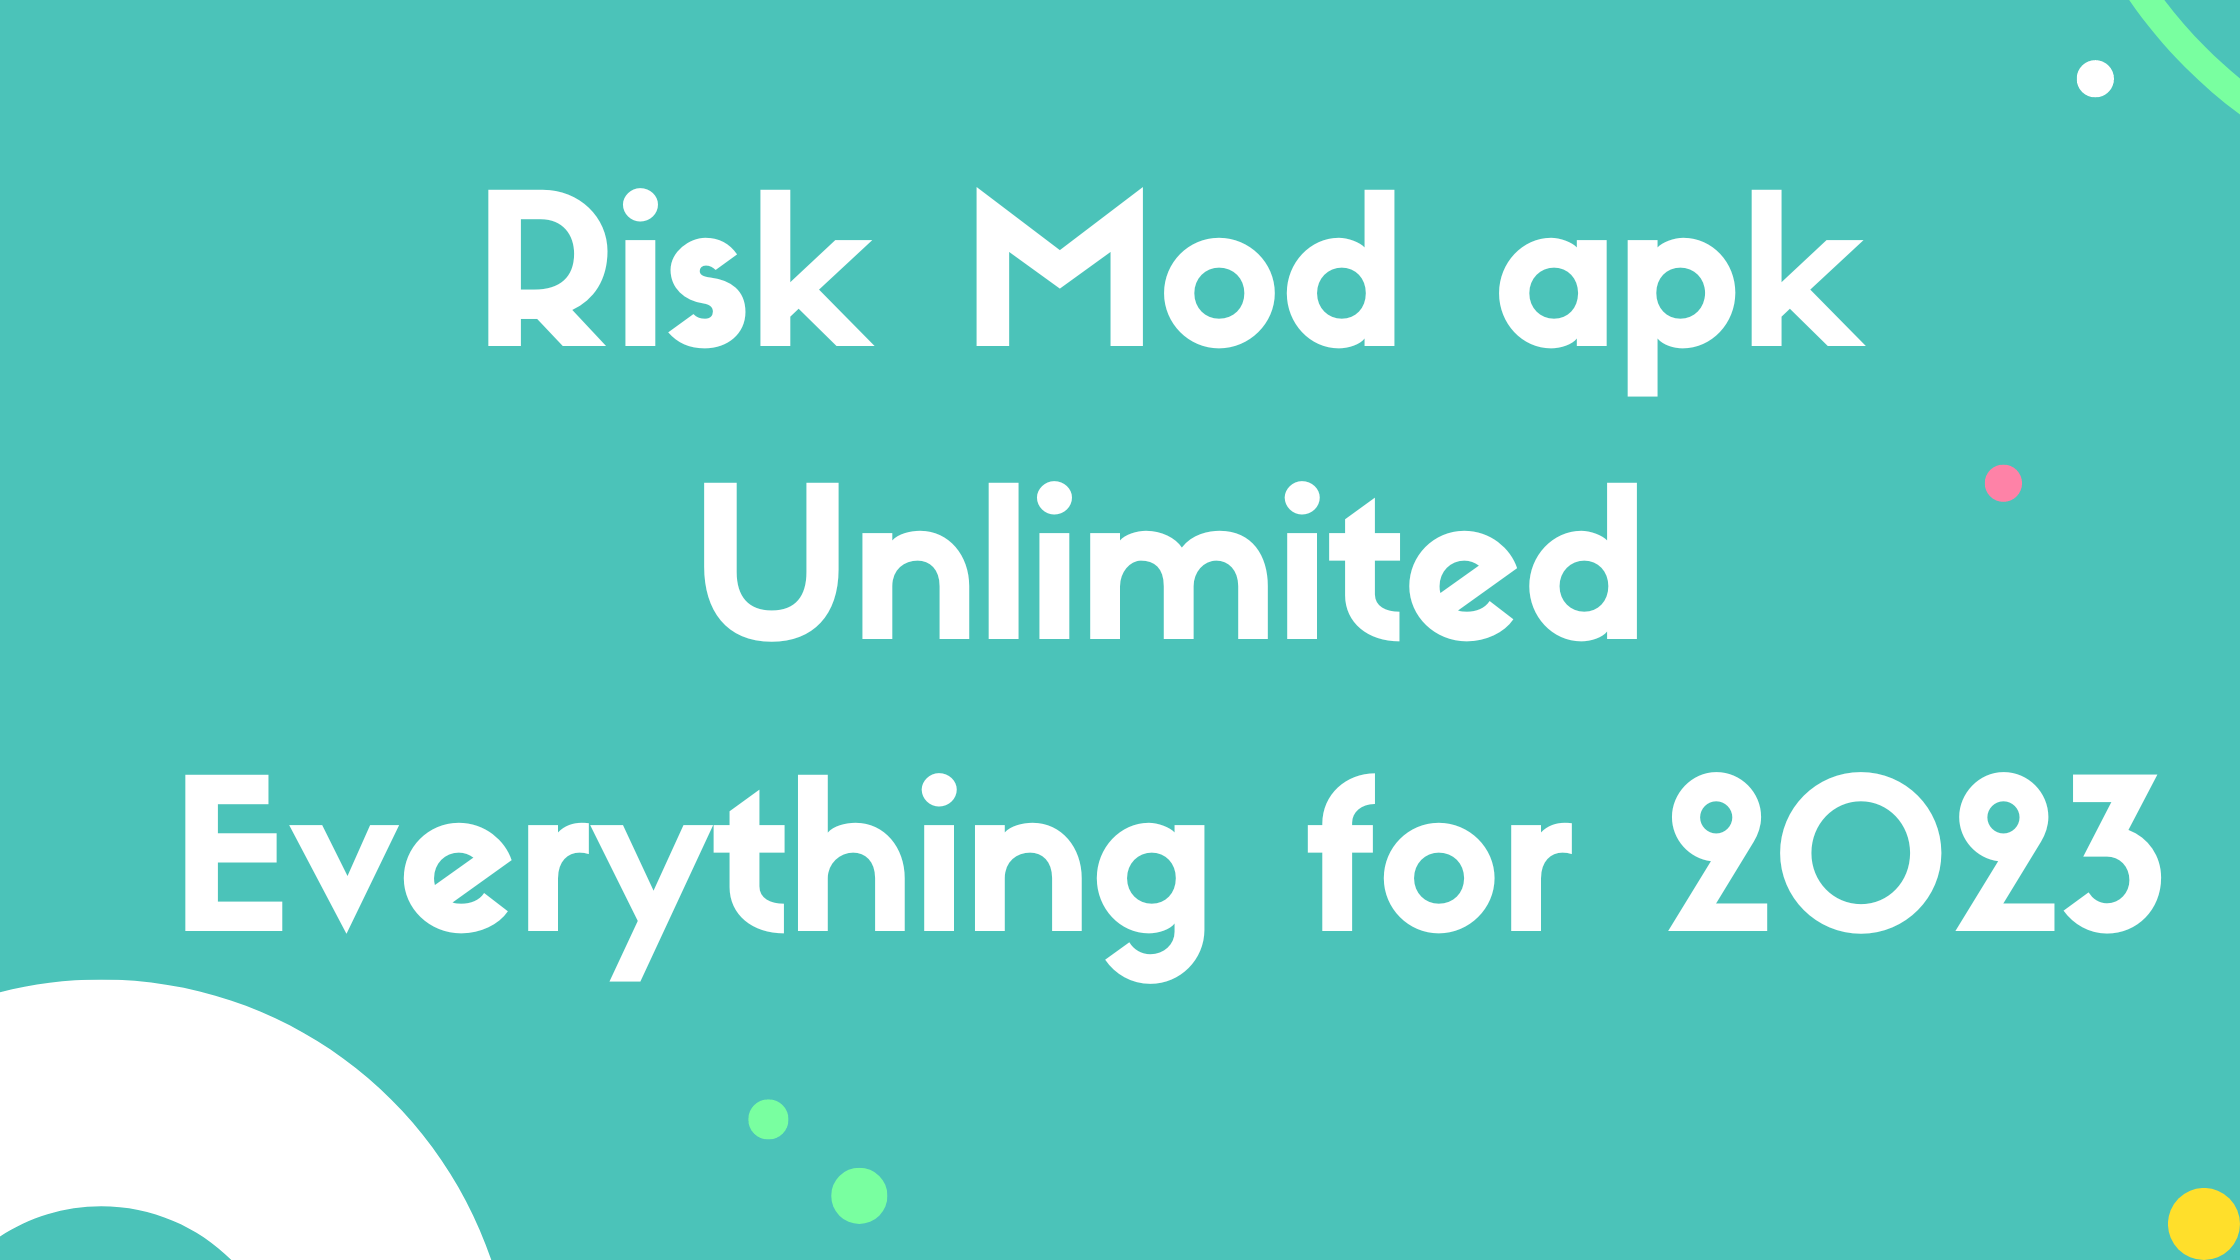 Risk Mod apk Unlimited Everything for 2023